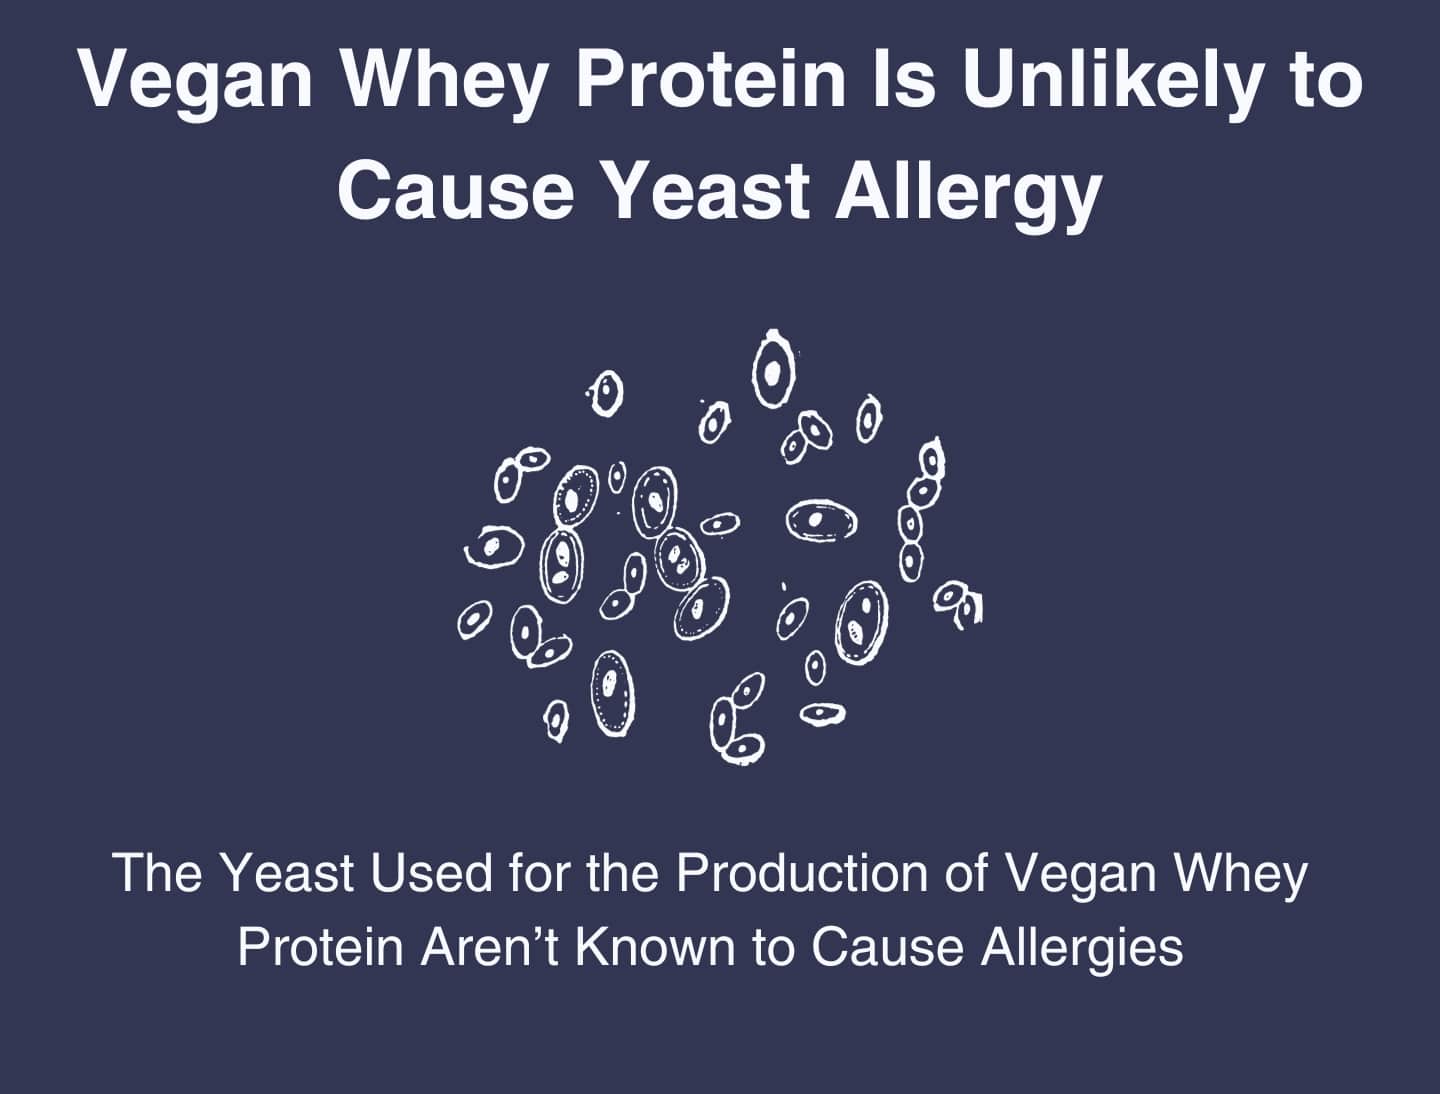 This image shows that vegan whey protein is unlikely to cause a yeast allergy.